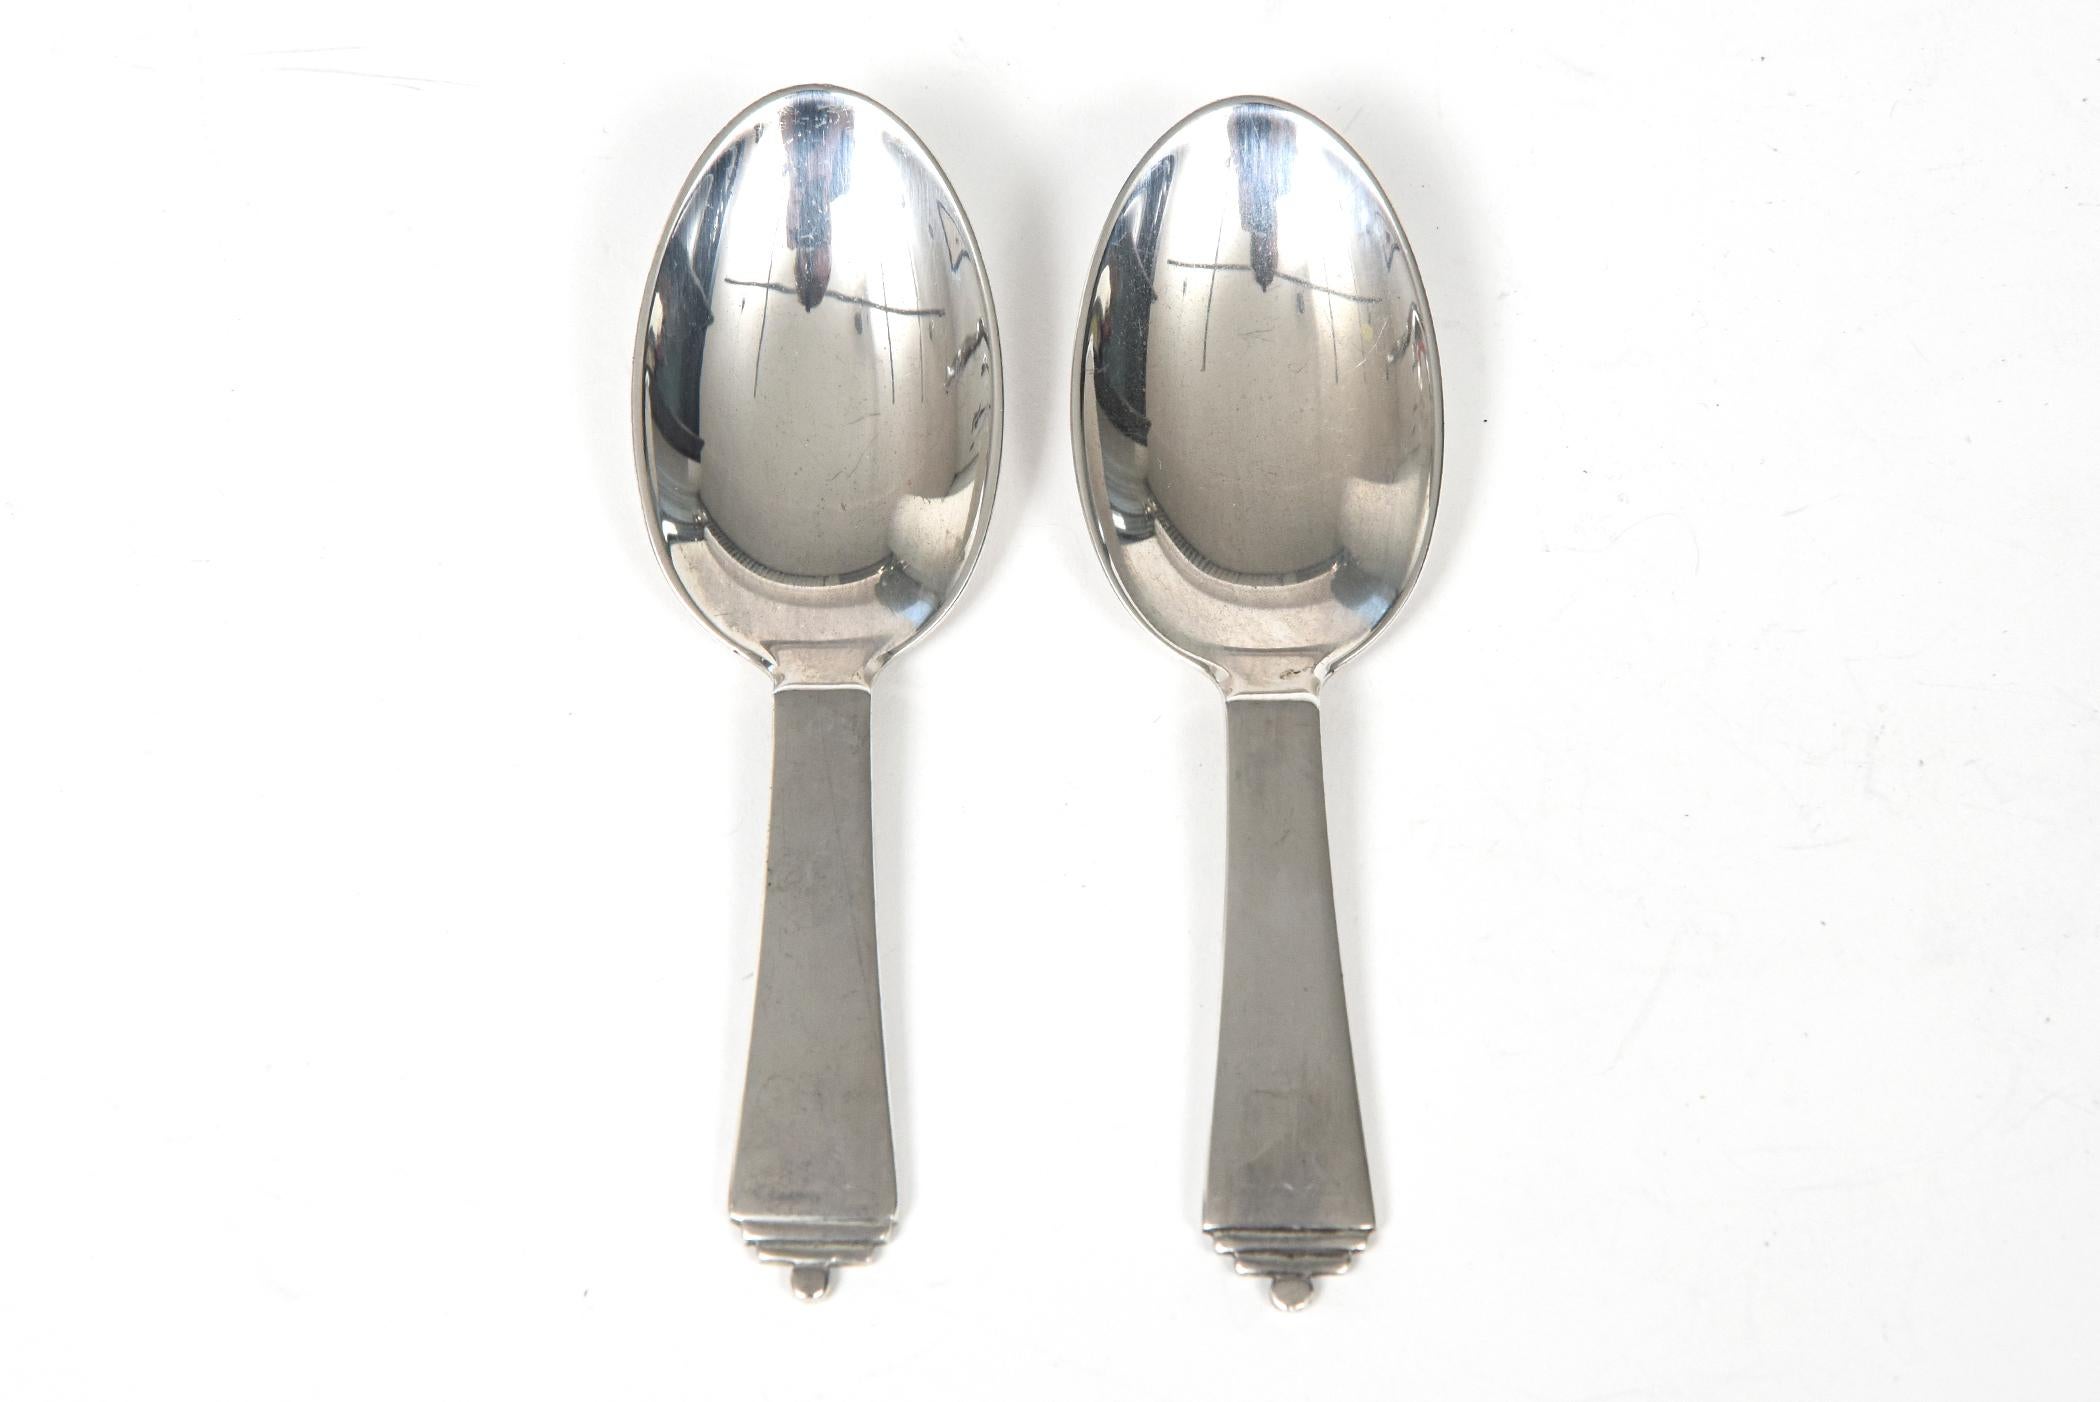 The Pyramid pattern was first introduced by Georg Jensen in 1927. It is still being produced today. This pair of baby spoons is a wonderful gift for someone with a new baby.